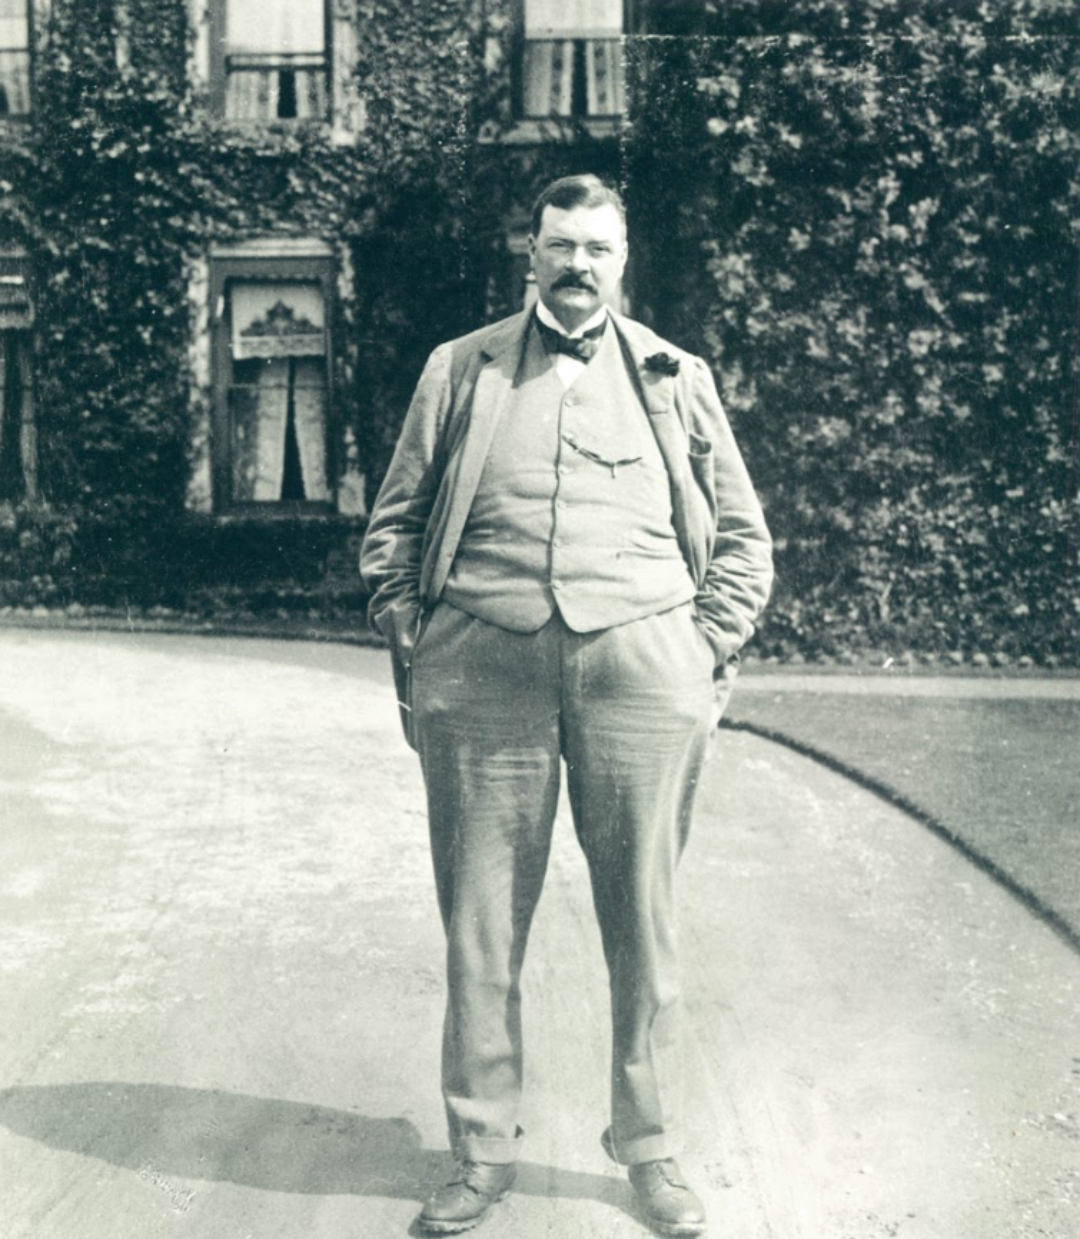 The Hon E W B Portman in front of Hestercombe House c 1905